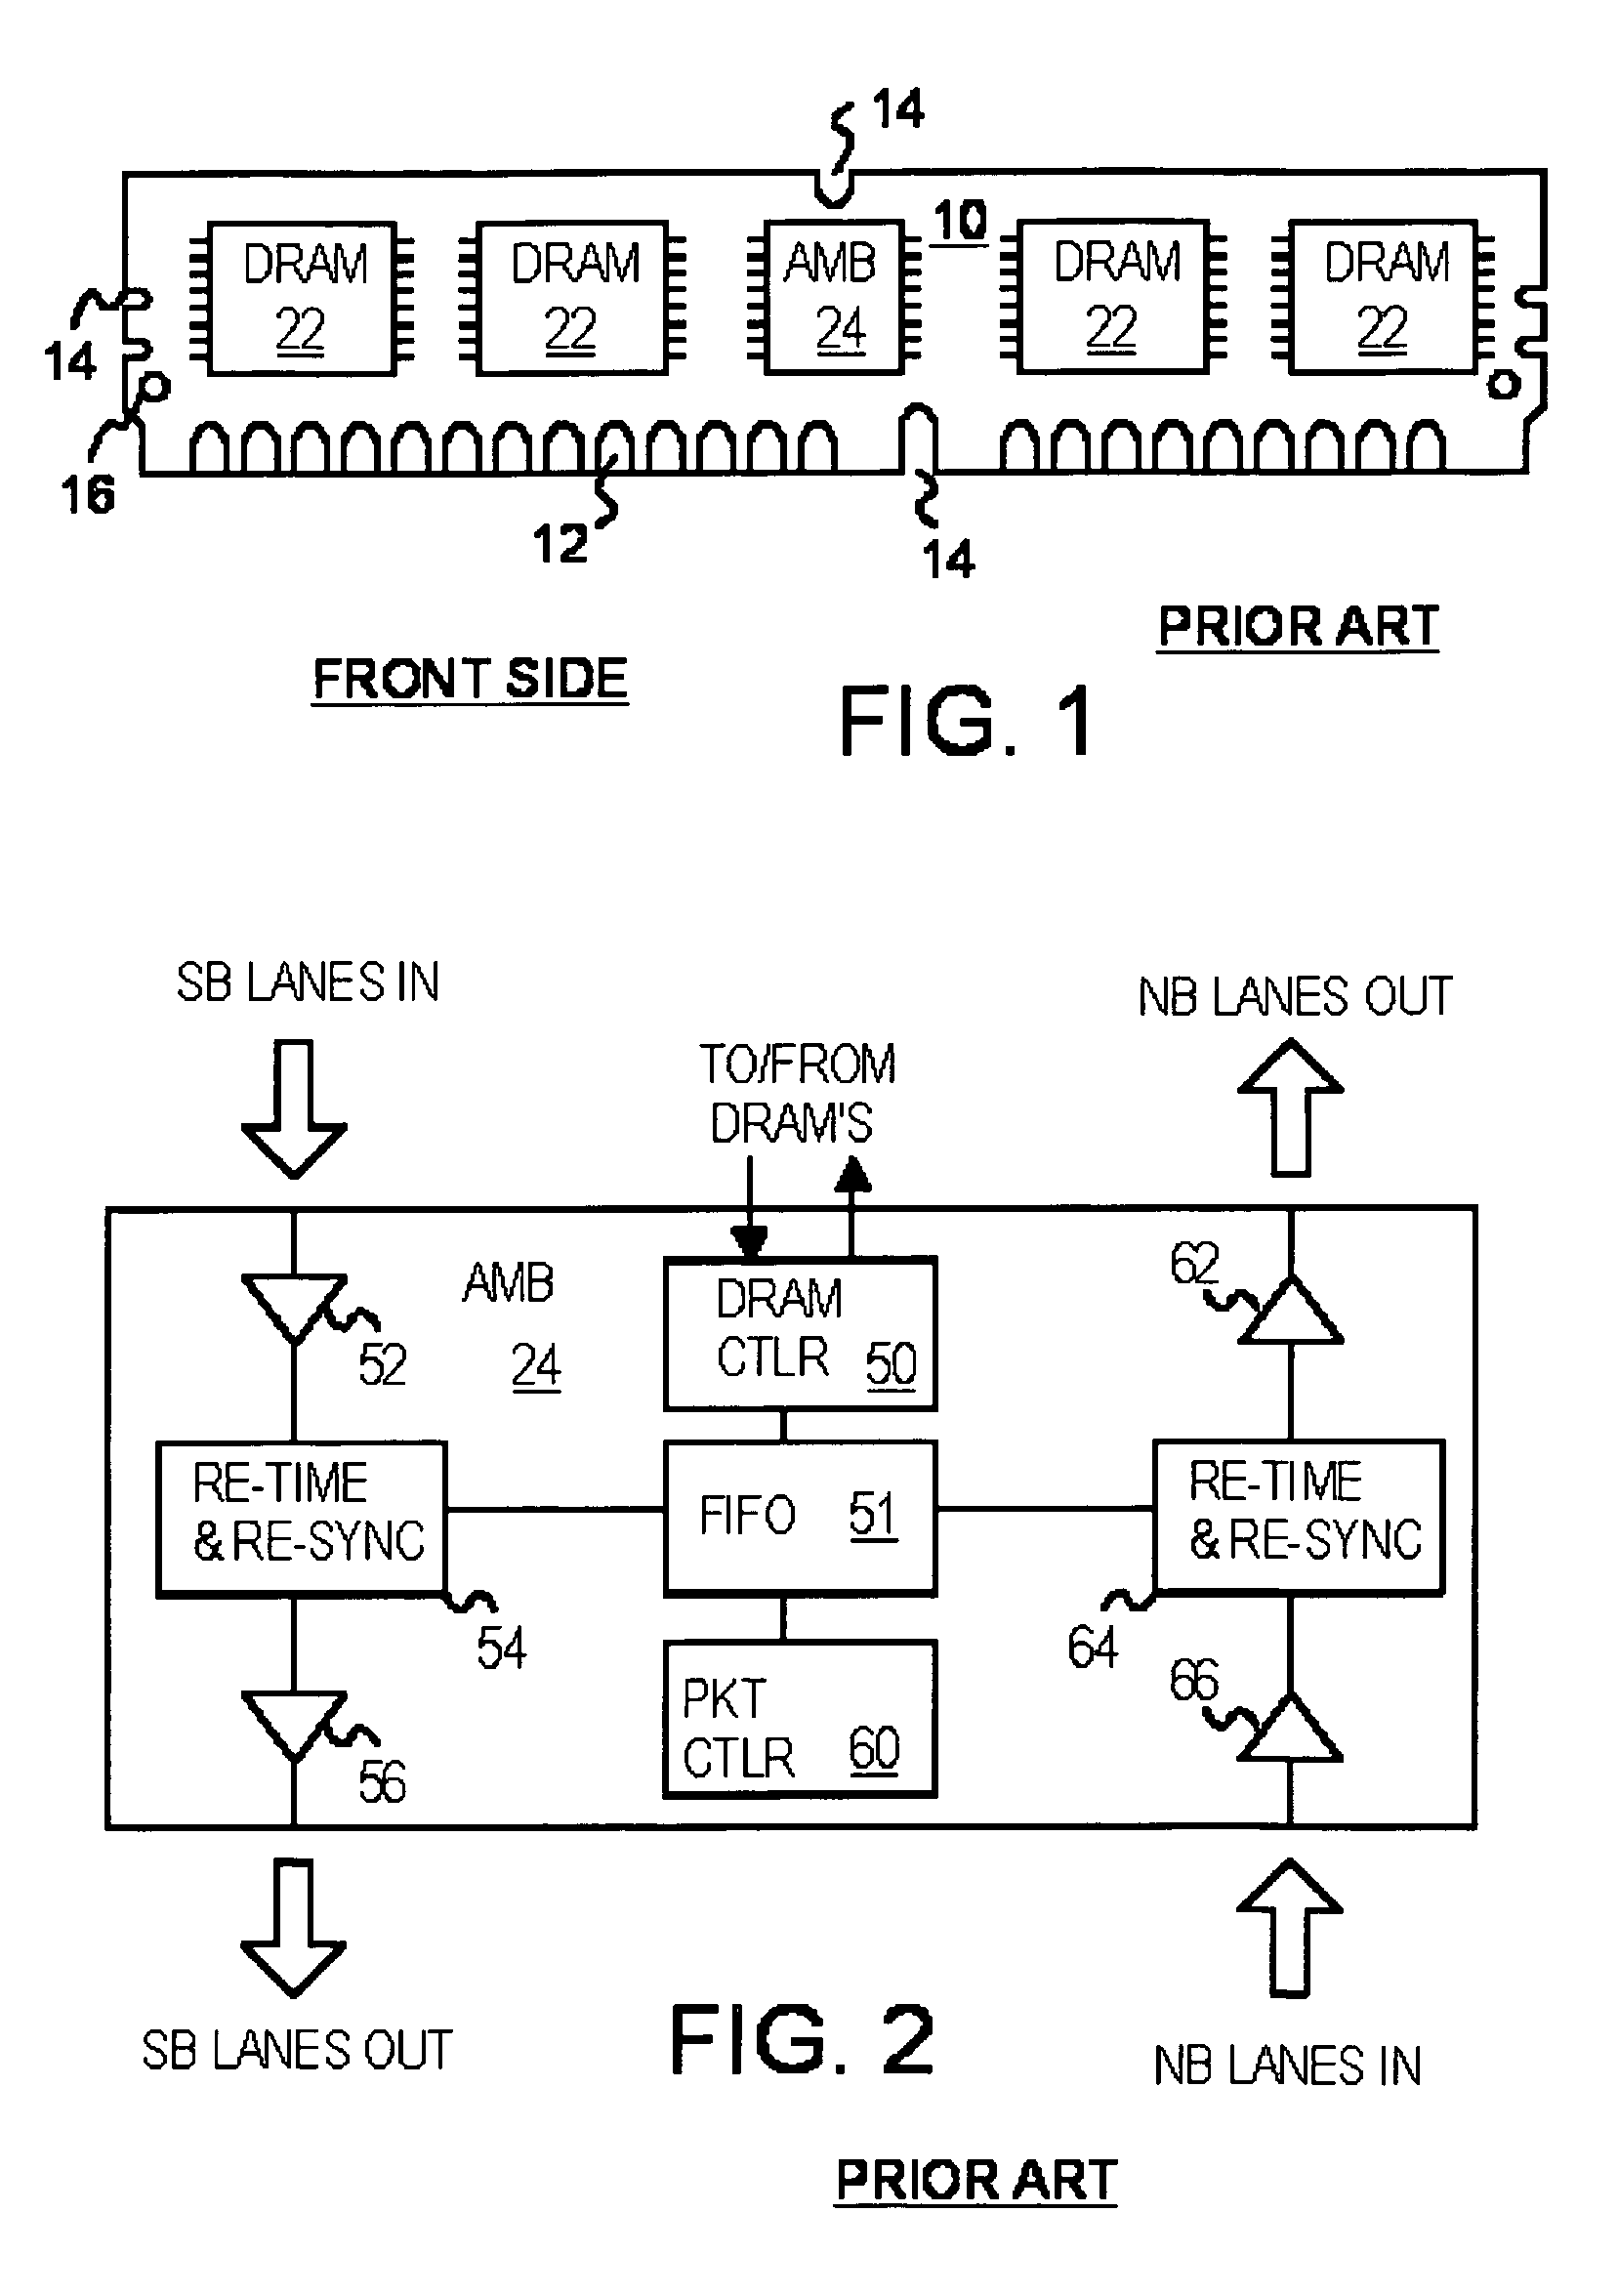 Branching memory-bus module with multiple downlink ports to standard fully-buffered memory modules